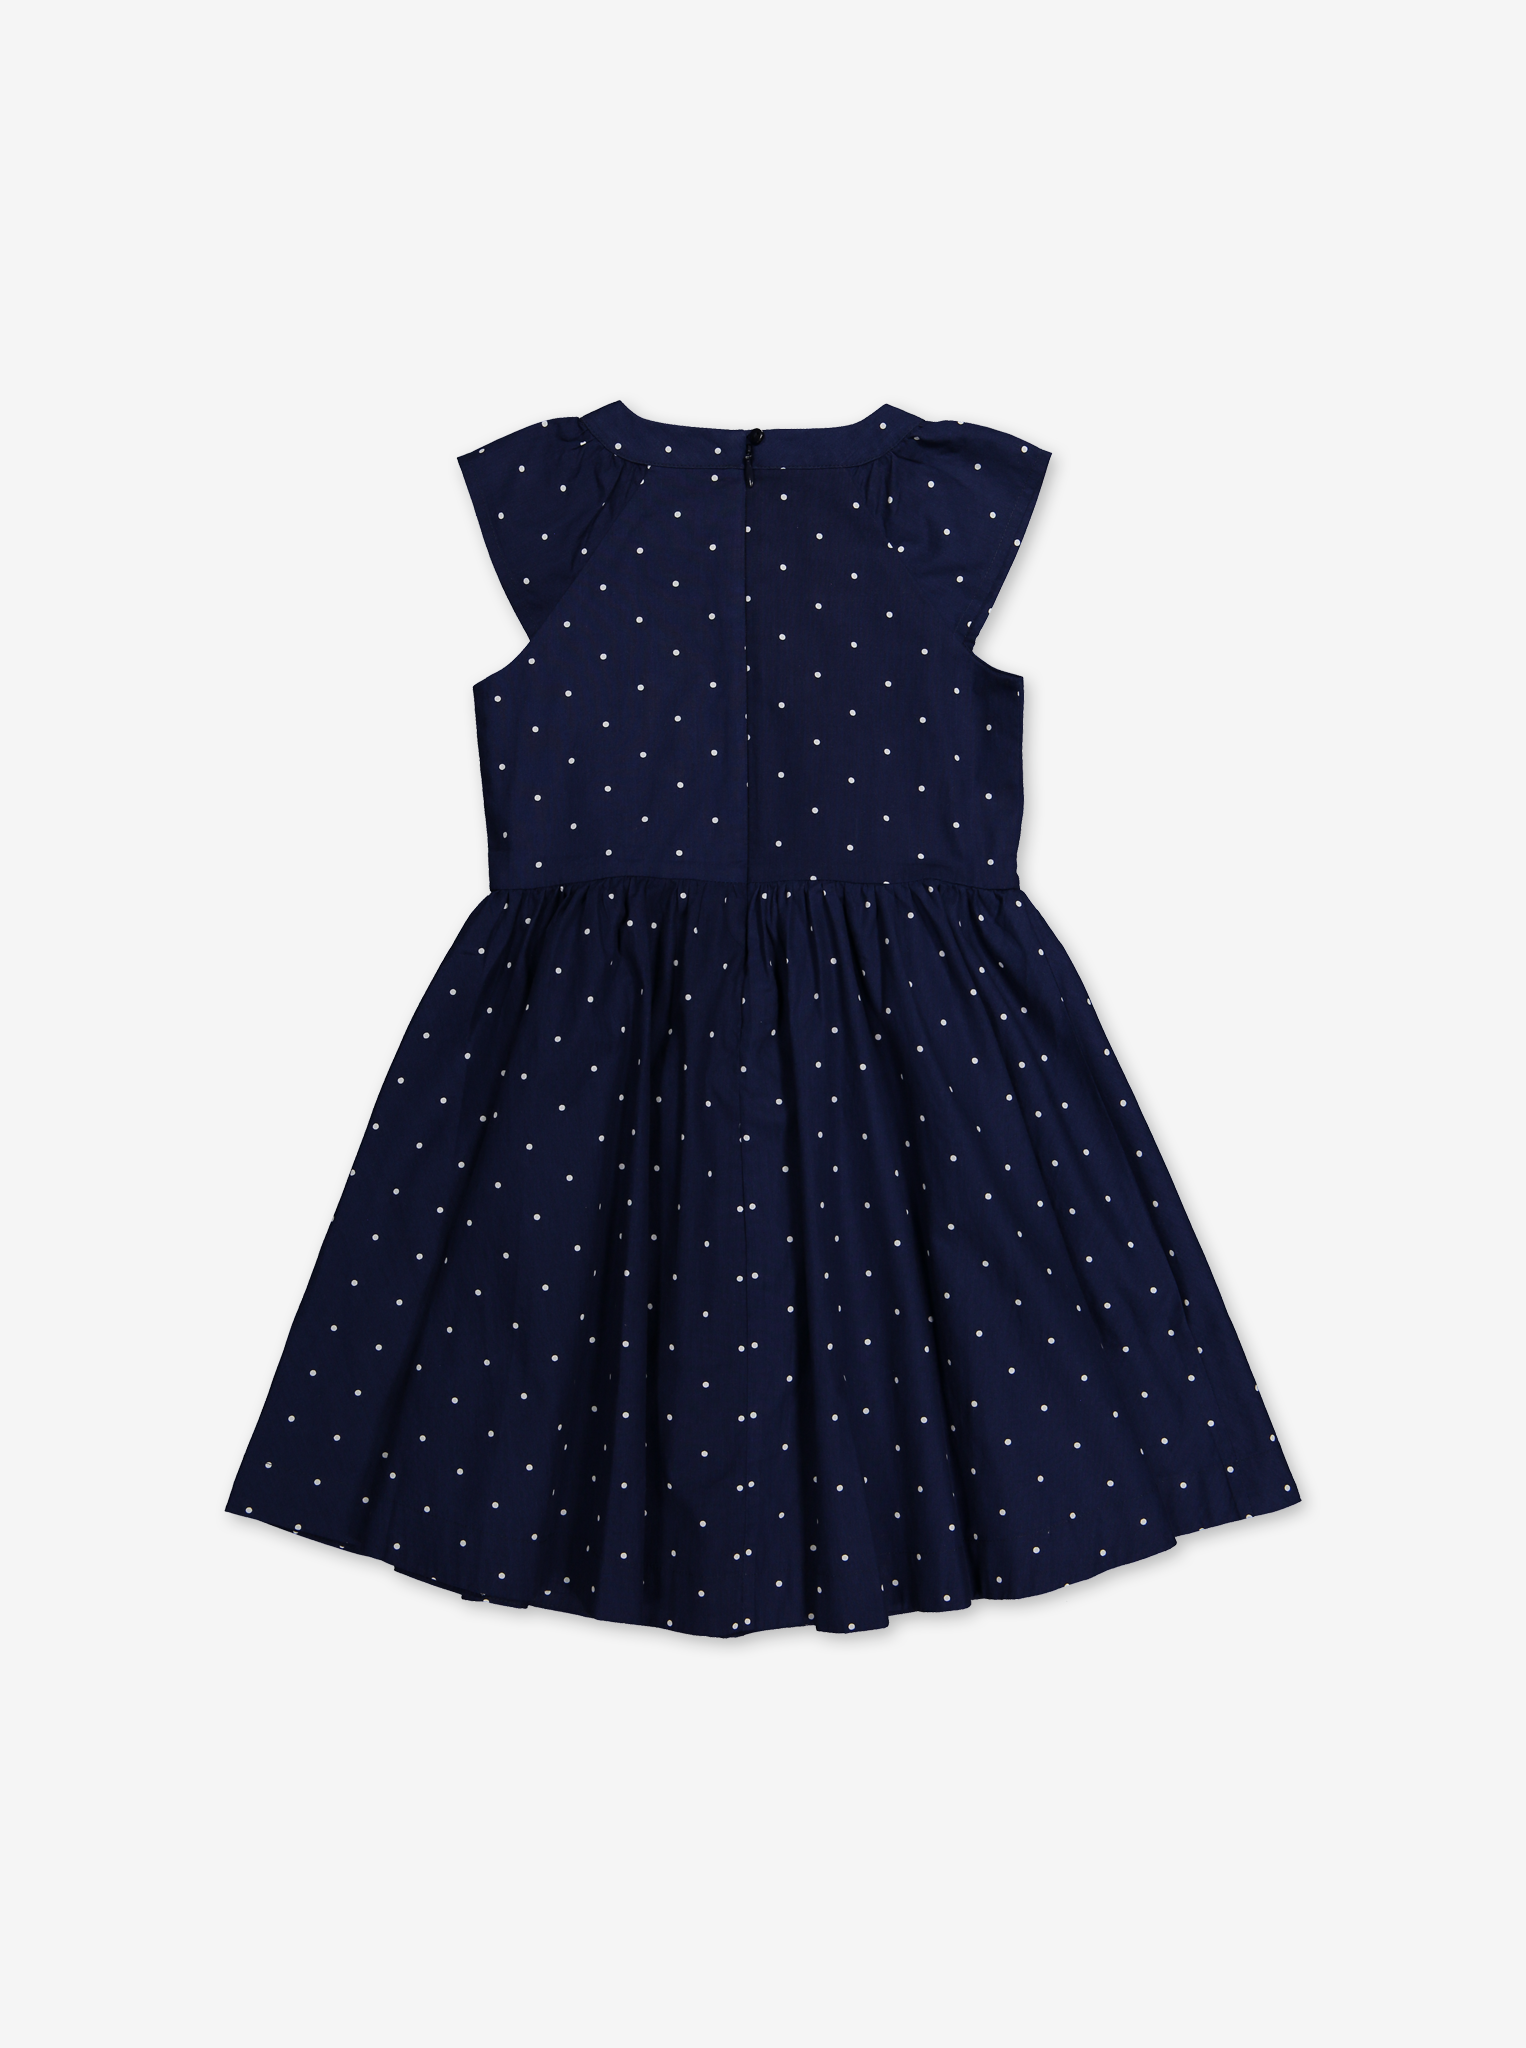 Polka Dot and Spotted Dresses